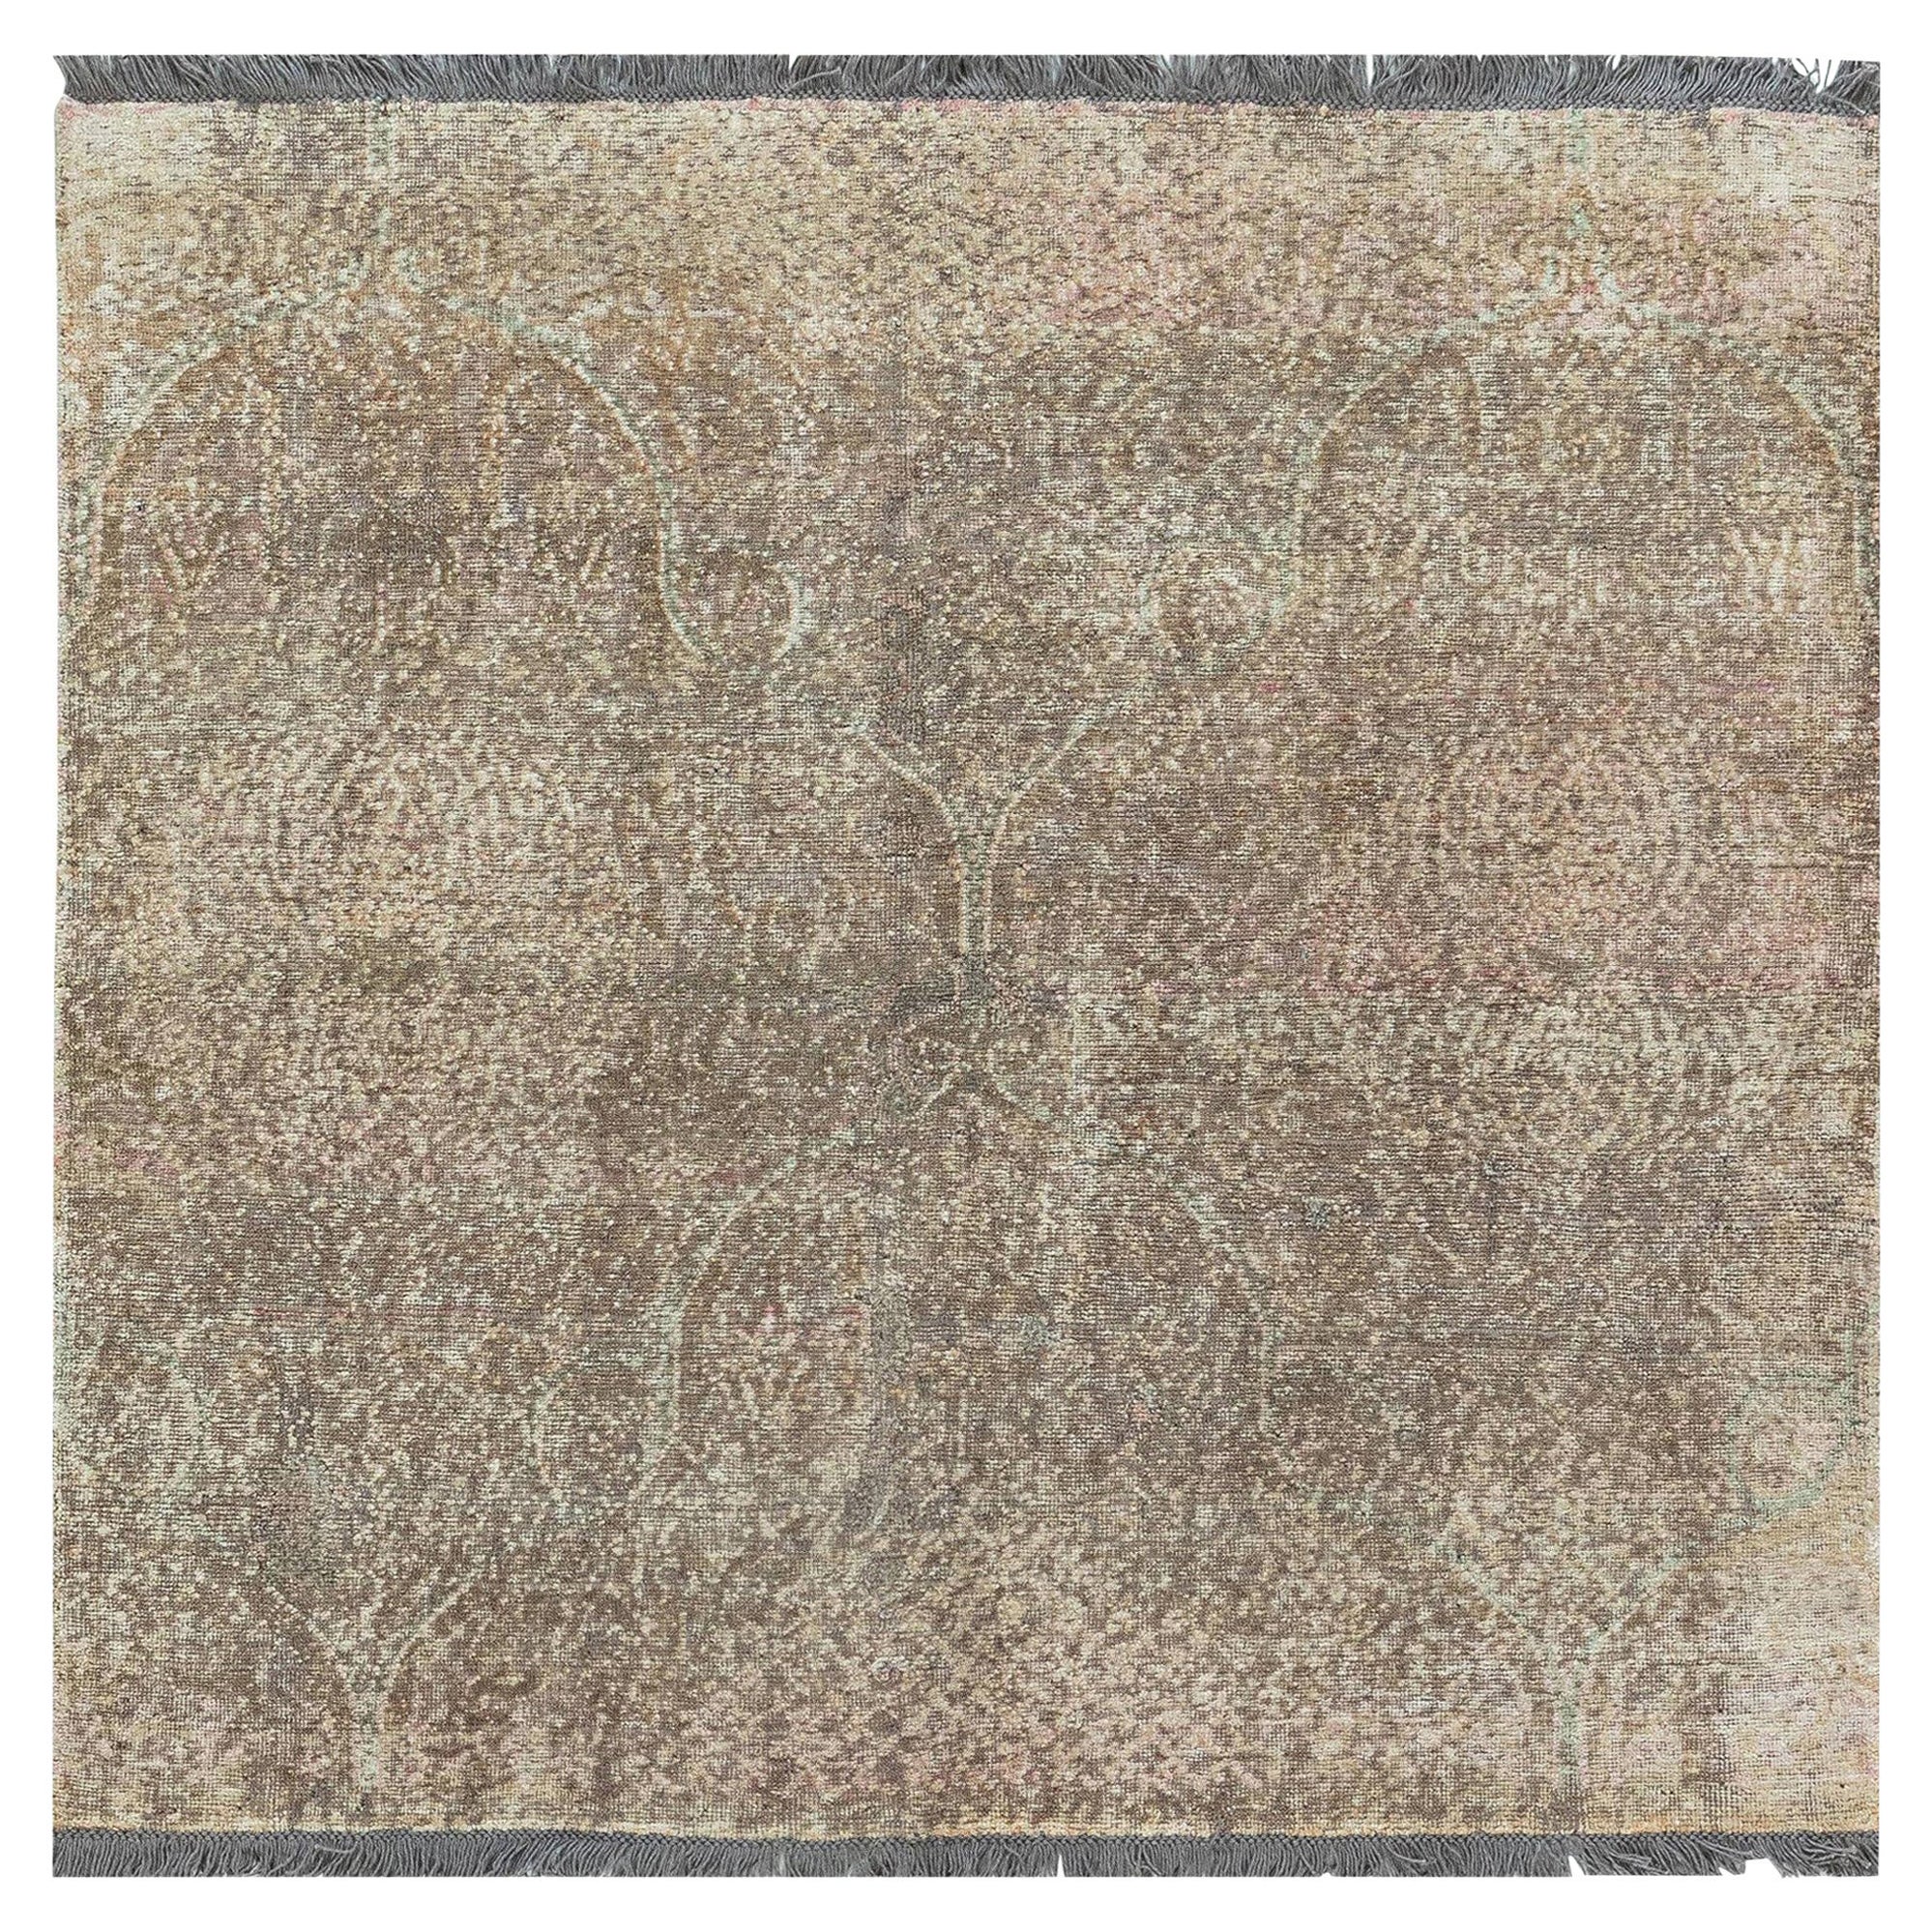 Traditional Inspired Blue Pink Purple Hand Knotted Rug by Doris Leslie Blau